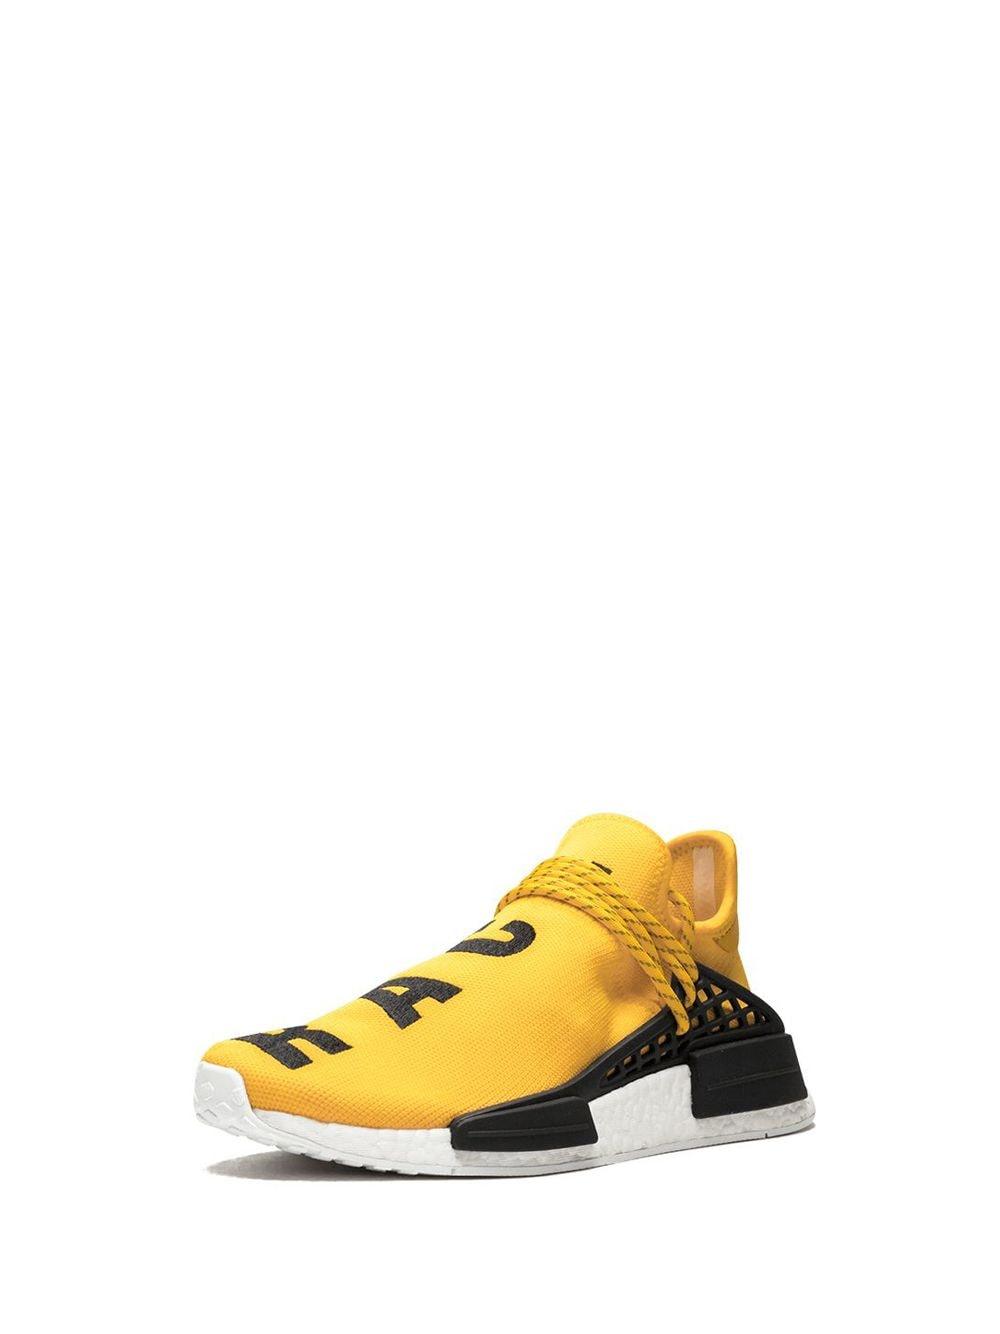 adidas Pw Human Race Nmd 'pharrell' Shoes in Yellow for Men - Lyst